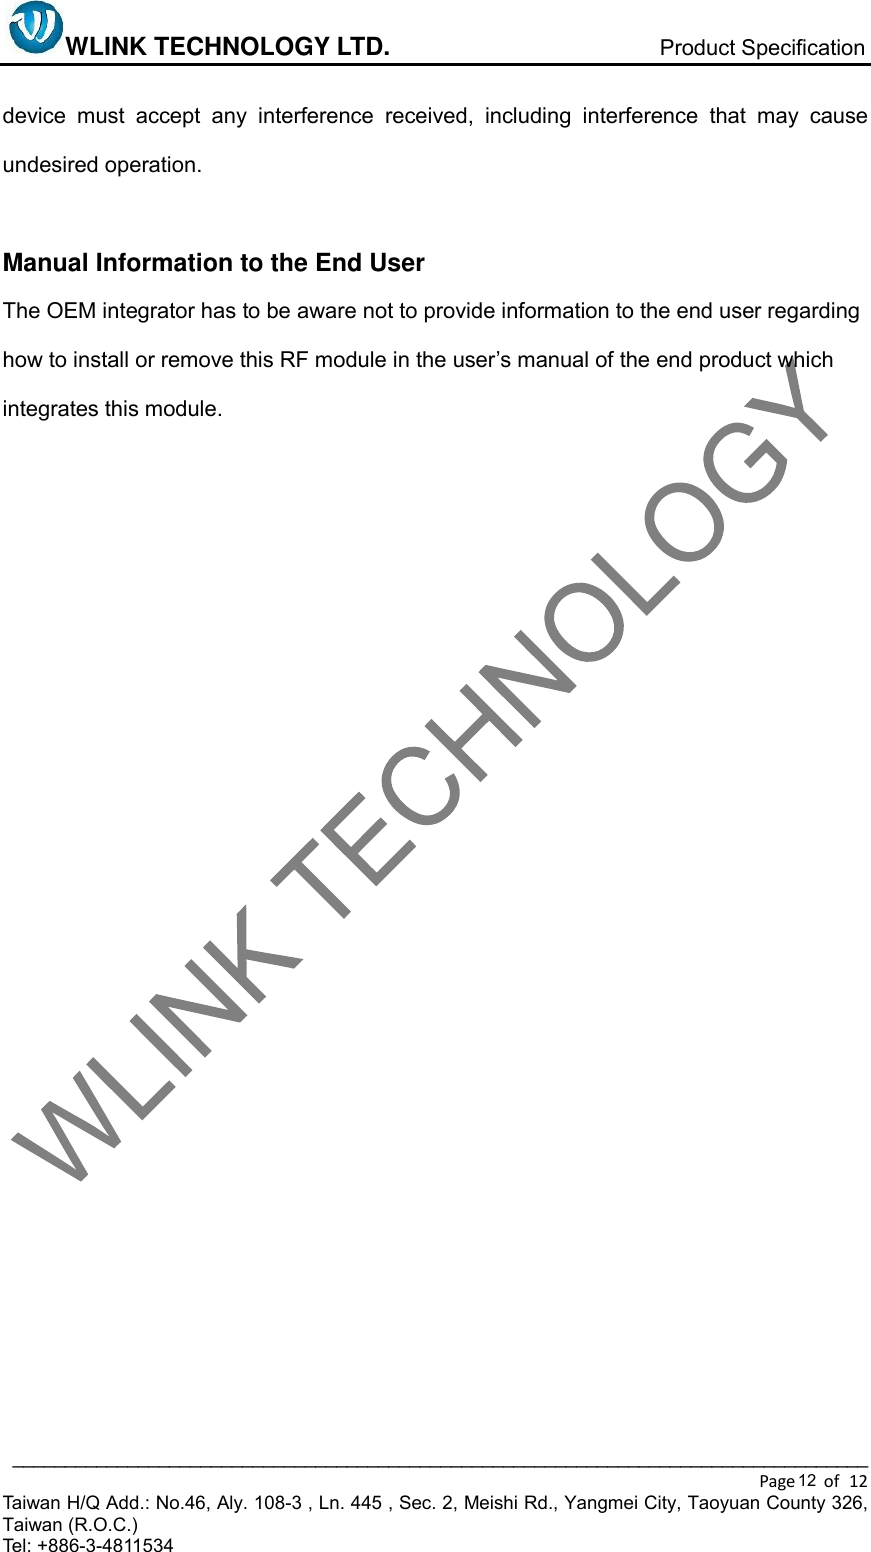 WLINK TECHNOLOGY LTD.                           Product Specification  __________________________________________________________________________________ Page    of  12 Taiwan H/Q Add.: No.46, Aly. 108-3 , Ln. 445 , Sec. 2, Meishi Rd., Yangmei City, Taoyuan County 326, Taiwan (R.O.C.)   Tel: +886-3-4811534   device  must  accept  any  interference  received,  including  interference  that  may  cause undesired operation.          Manual Information to the End User     The OEM integrator has to be aware not to provide information to the end user regarding how to install or remove this RF module in the user’s manual of the end product which integrates this module.     12